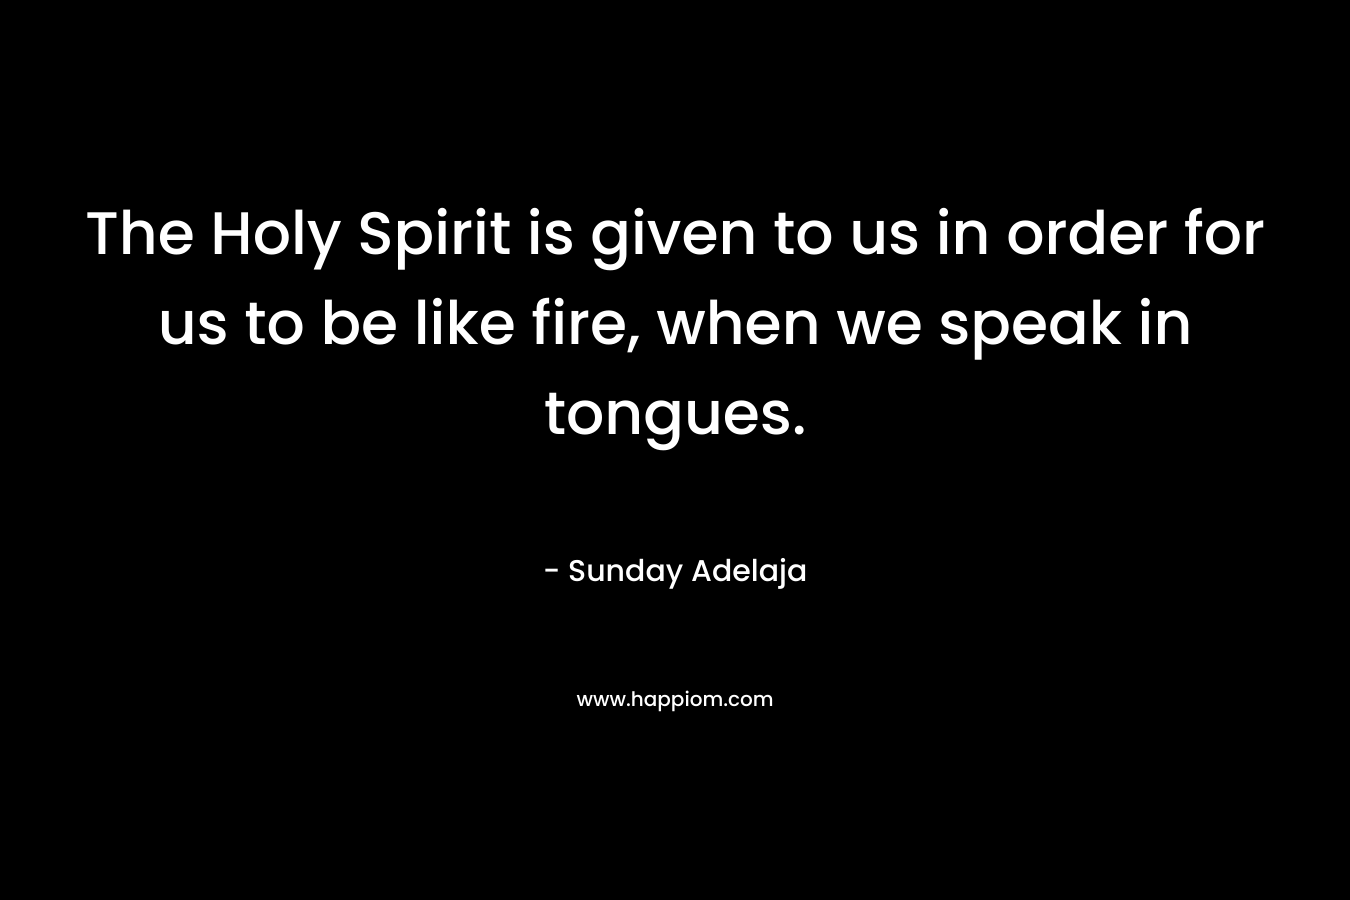 The Holy Spirit is given to us in order for us to be like fire, when we speak in tongues. – Sunday Adelaja